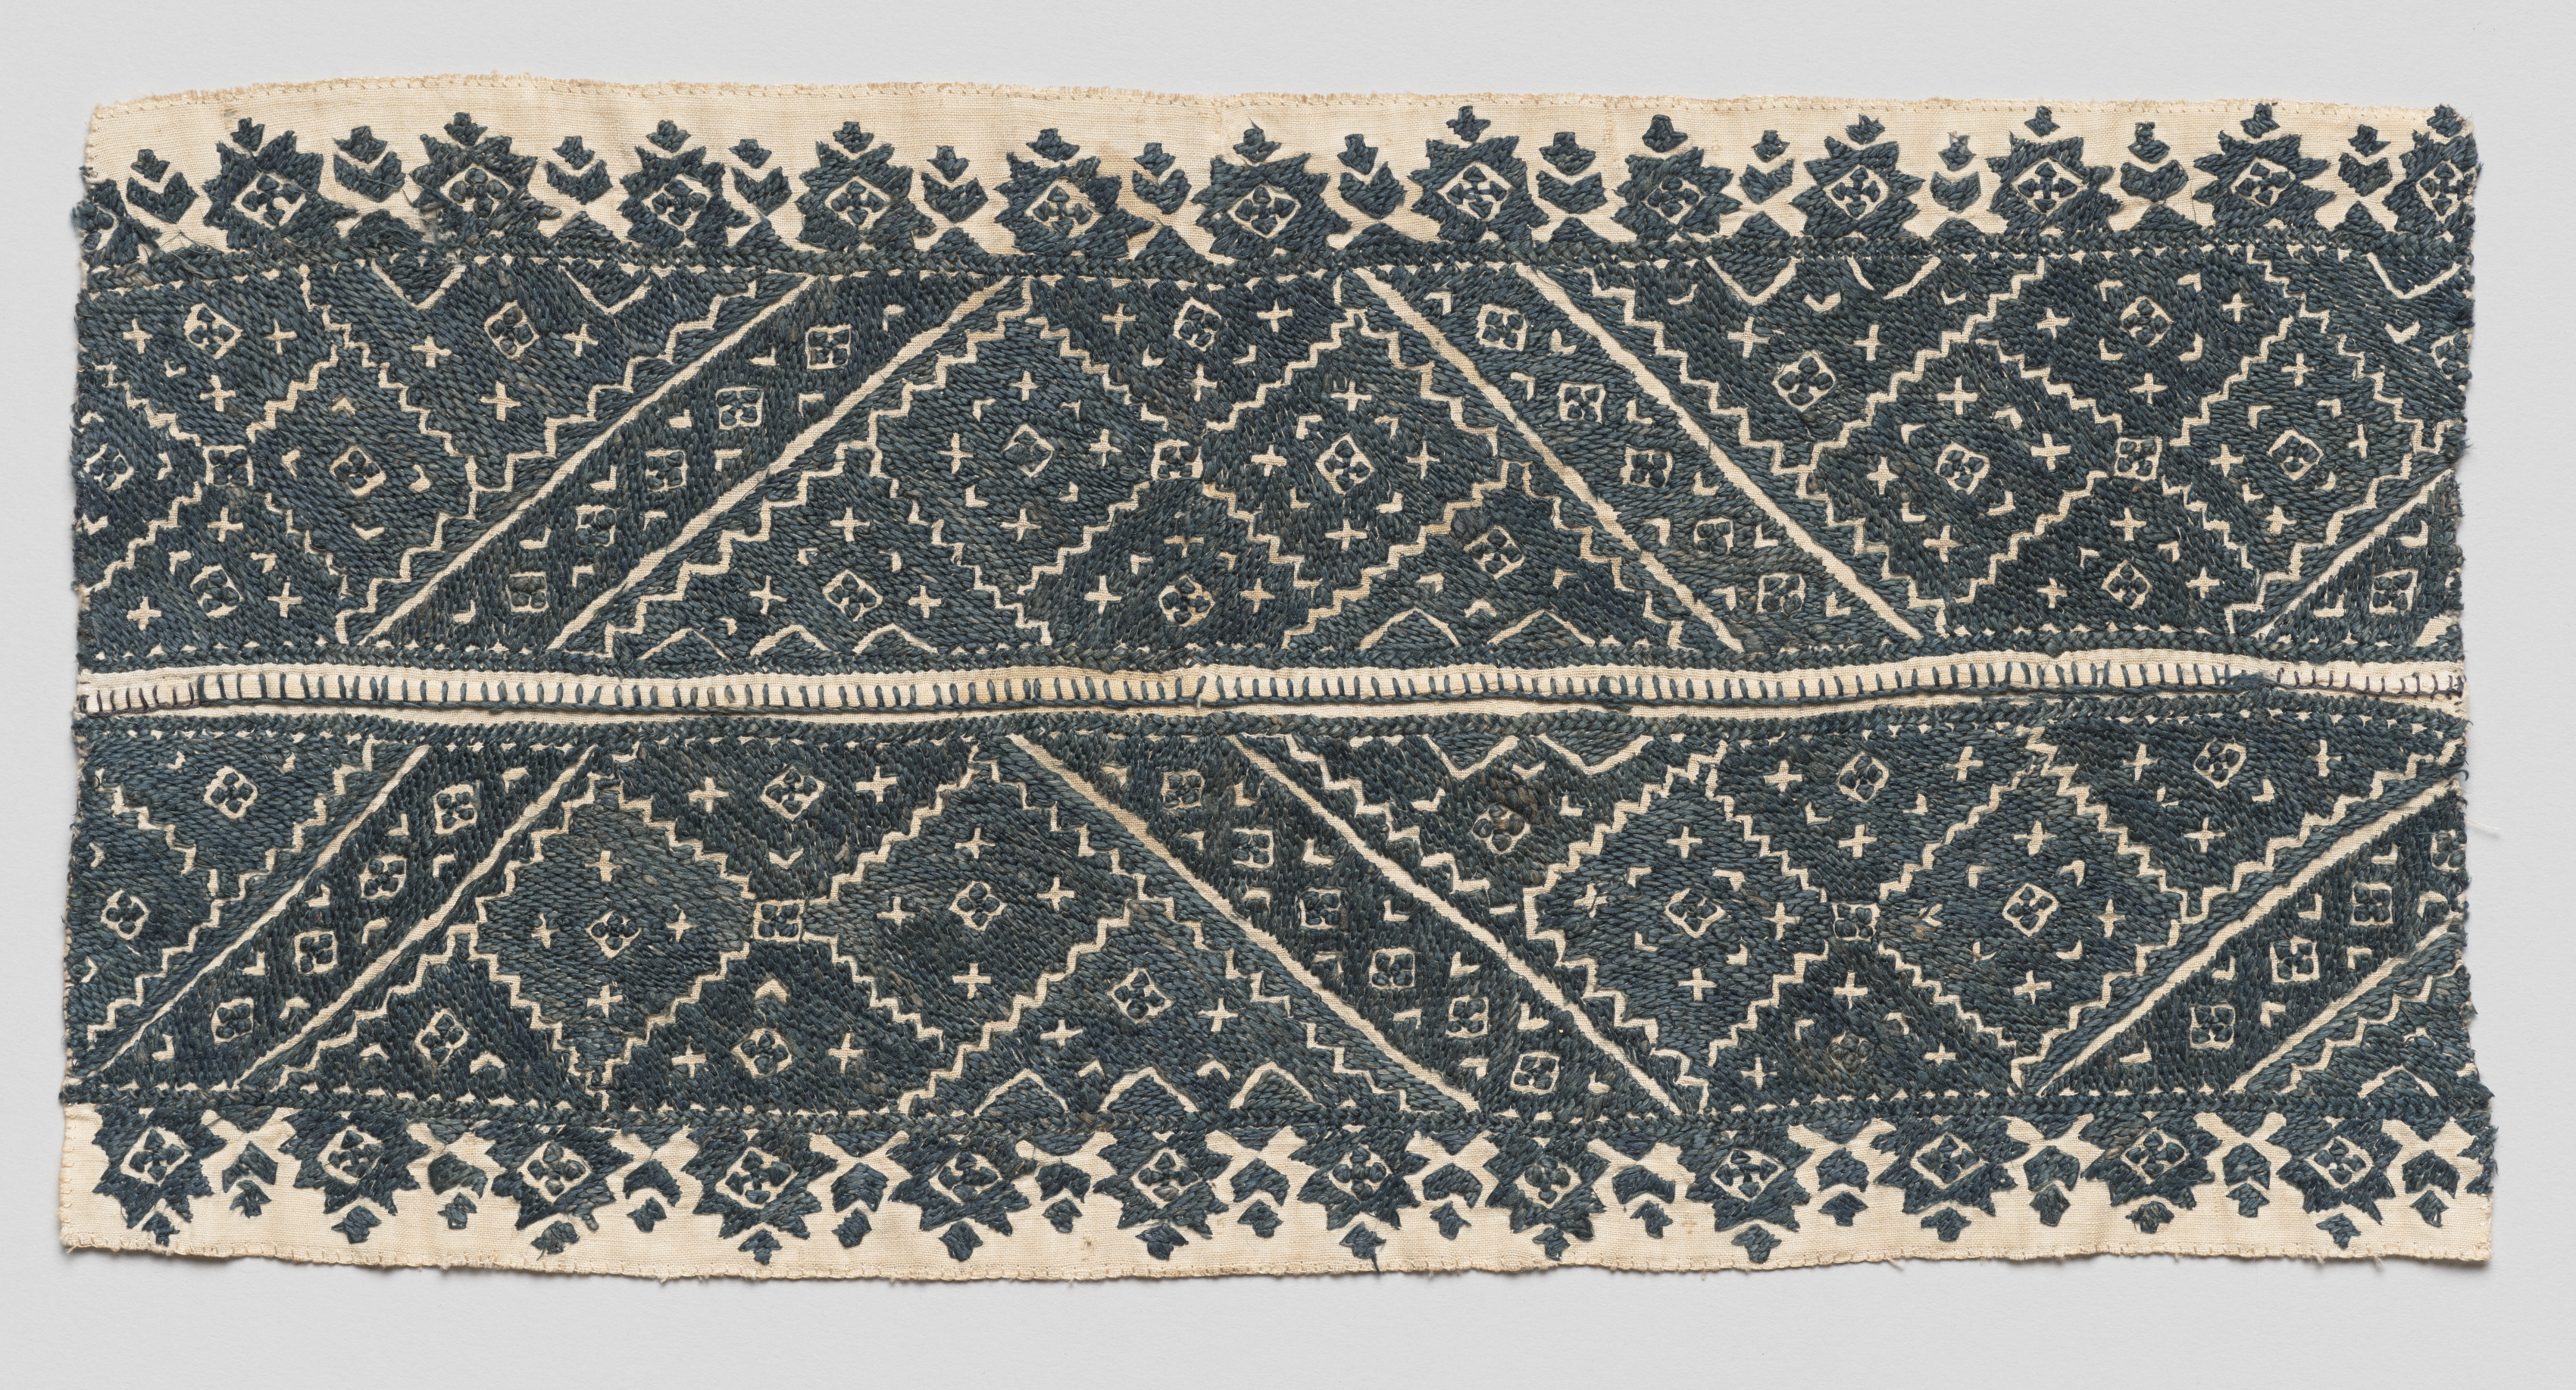 Fragment of "Aleuj" Embroidery